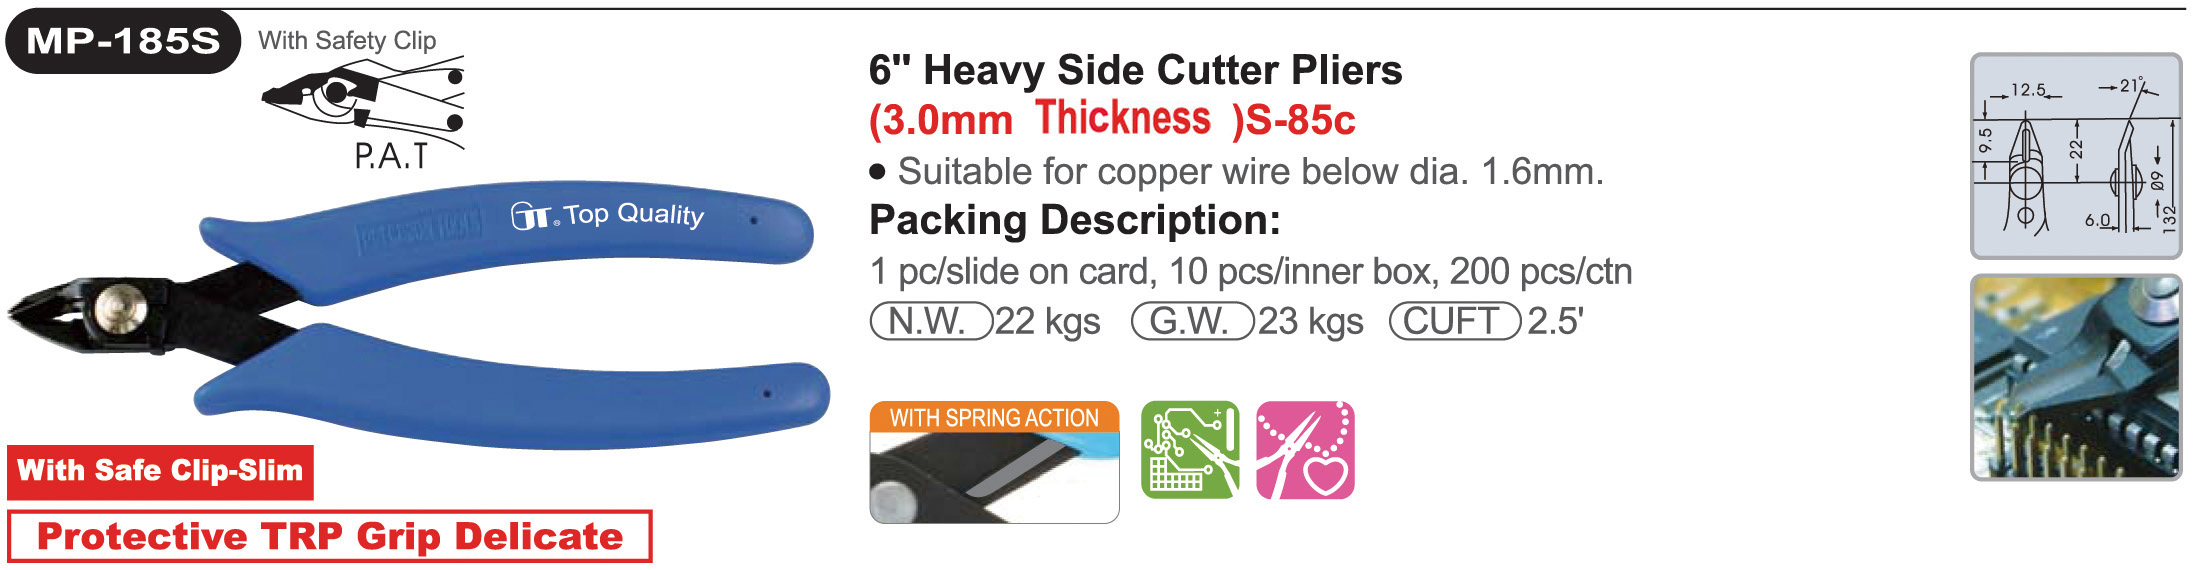 proimages/product/pliers/cutting_pliers/Diagonal_Cutters/MP-185S/MP-185S.jpg